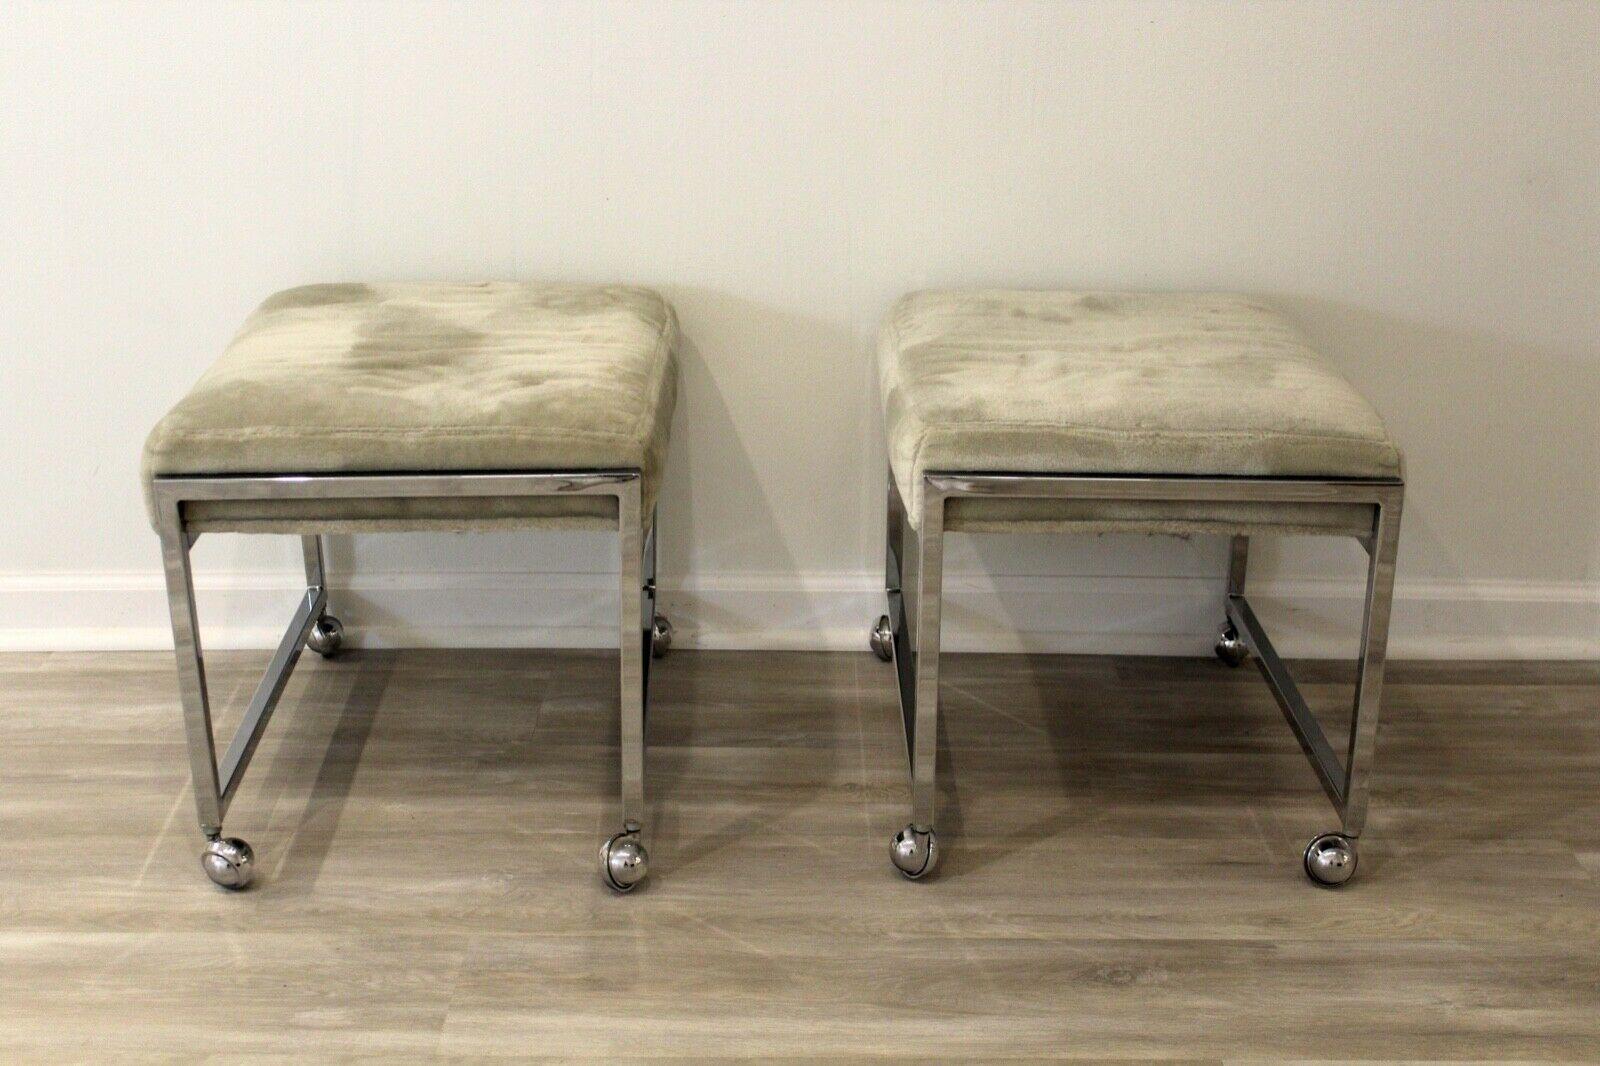 Contemporary Modern Pair of Baughman Style Chrome on Casters Stools Ottomans 5